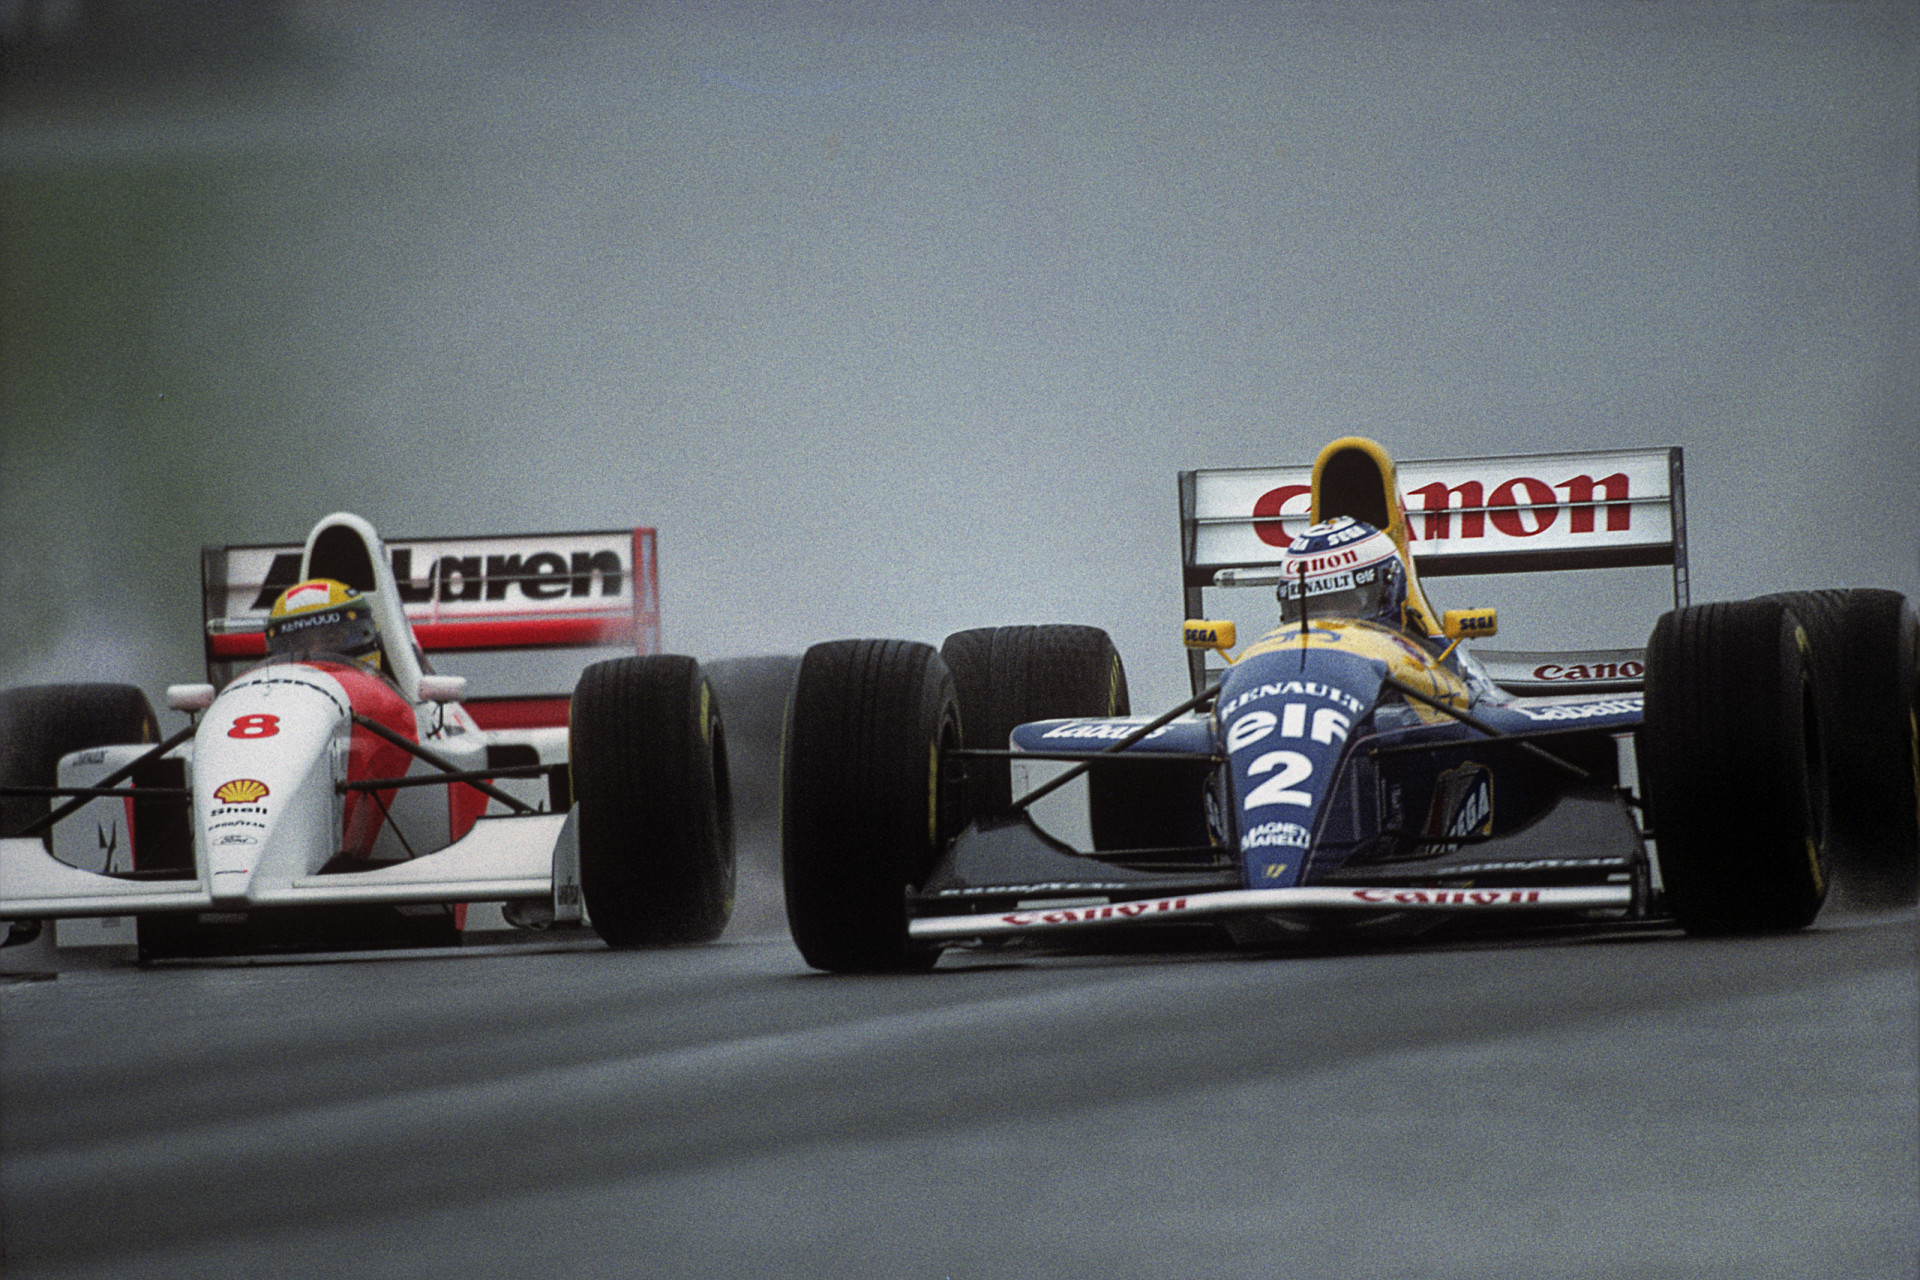 <p>With Prost in the more powerful car, most commentators were expecting the Frenchman to gear up and motor ahead of the Brazilian. But against all expectations, Senna matched Prost win-for-win over the first six races and led the drivers' standings. One outstanding victory was at the Grand Prix of Europe at Donington Park in England, when Senna took the checkered flag under a rain-lashed circuit. Senna and Prost are pictured battling it out on the day.</p><p>You may also like:<a href="https://www.starsinsider.com/n/491351?utm_source=msn.com&utm_medium=display&utm_campaign=referral_description&utm_content=703485en-us"> Celebs living with sleep disorders</a></p>